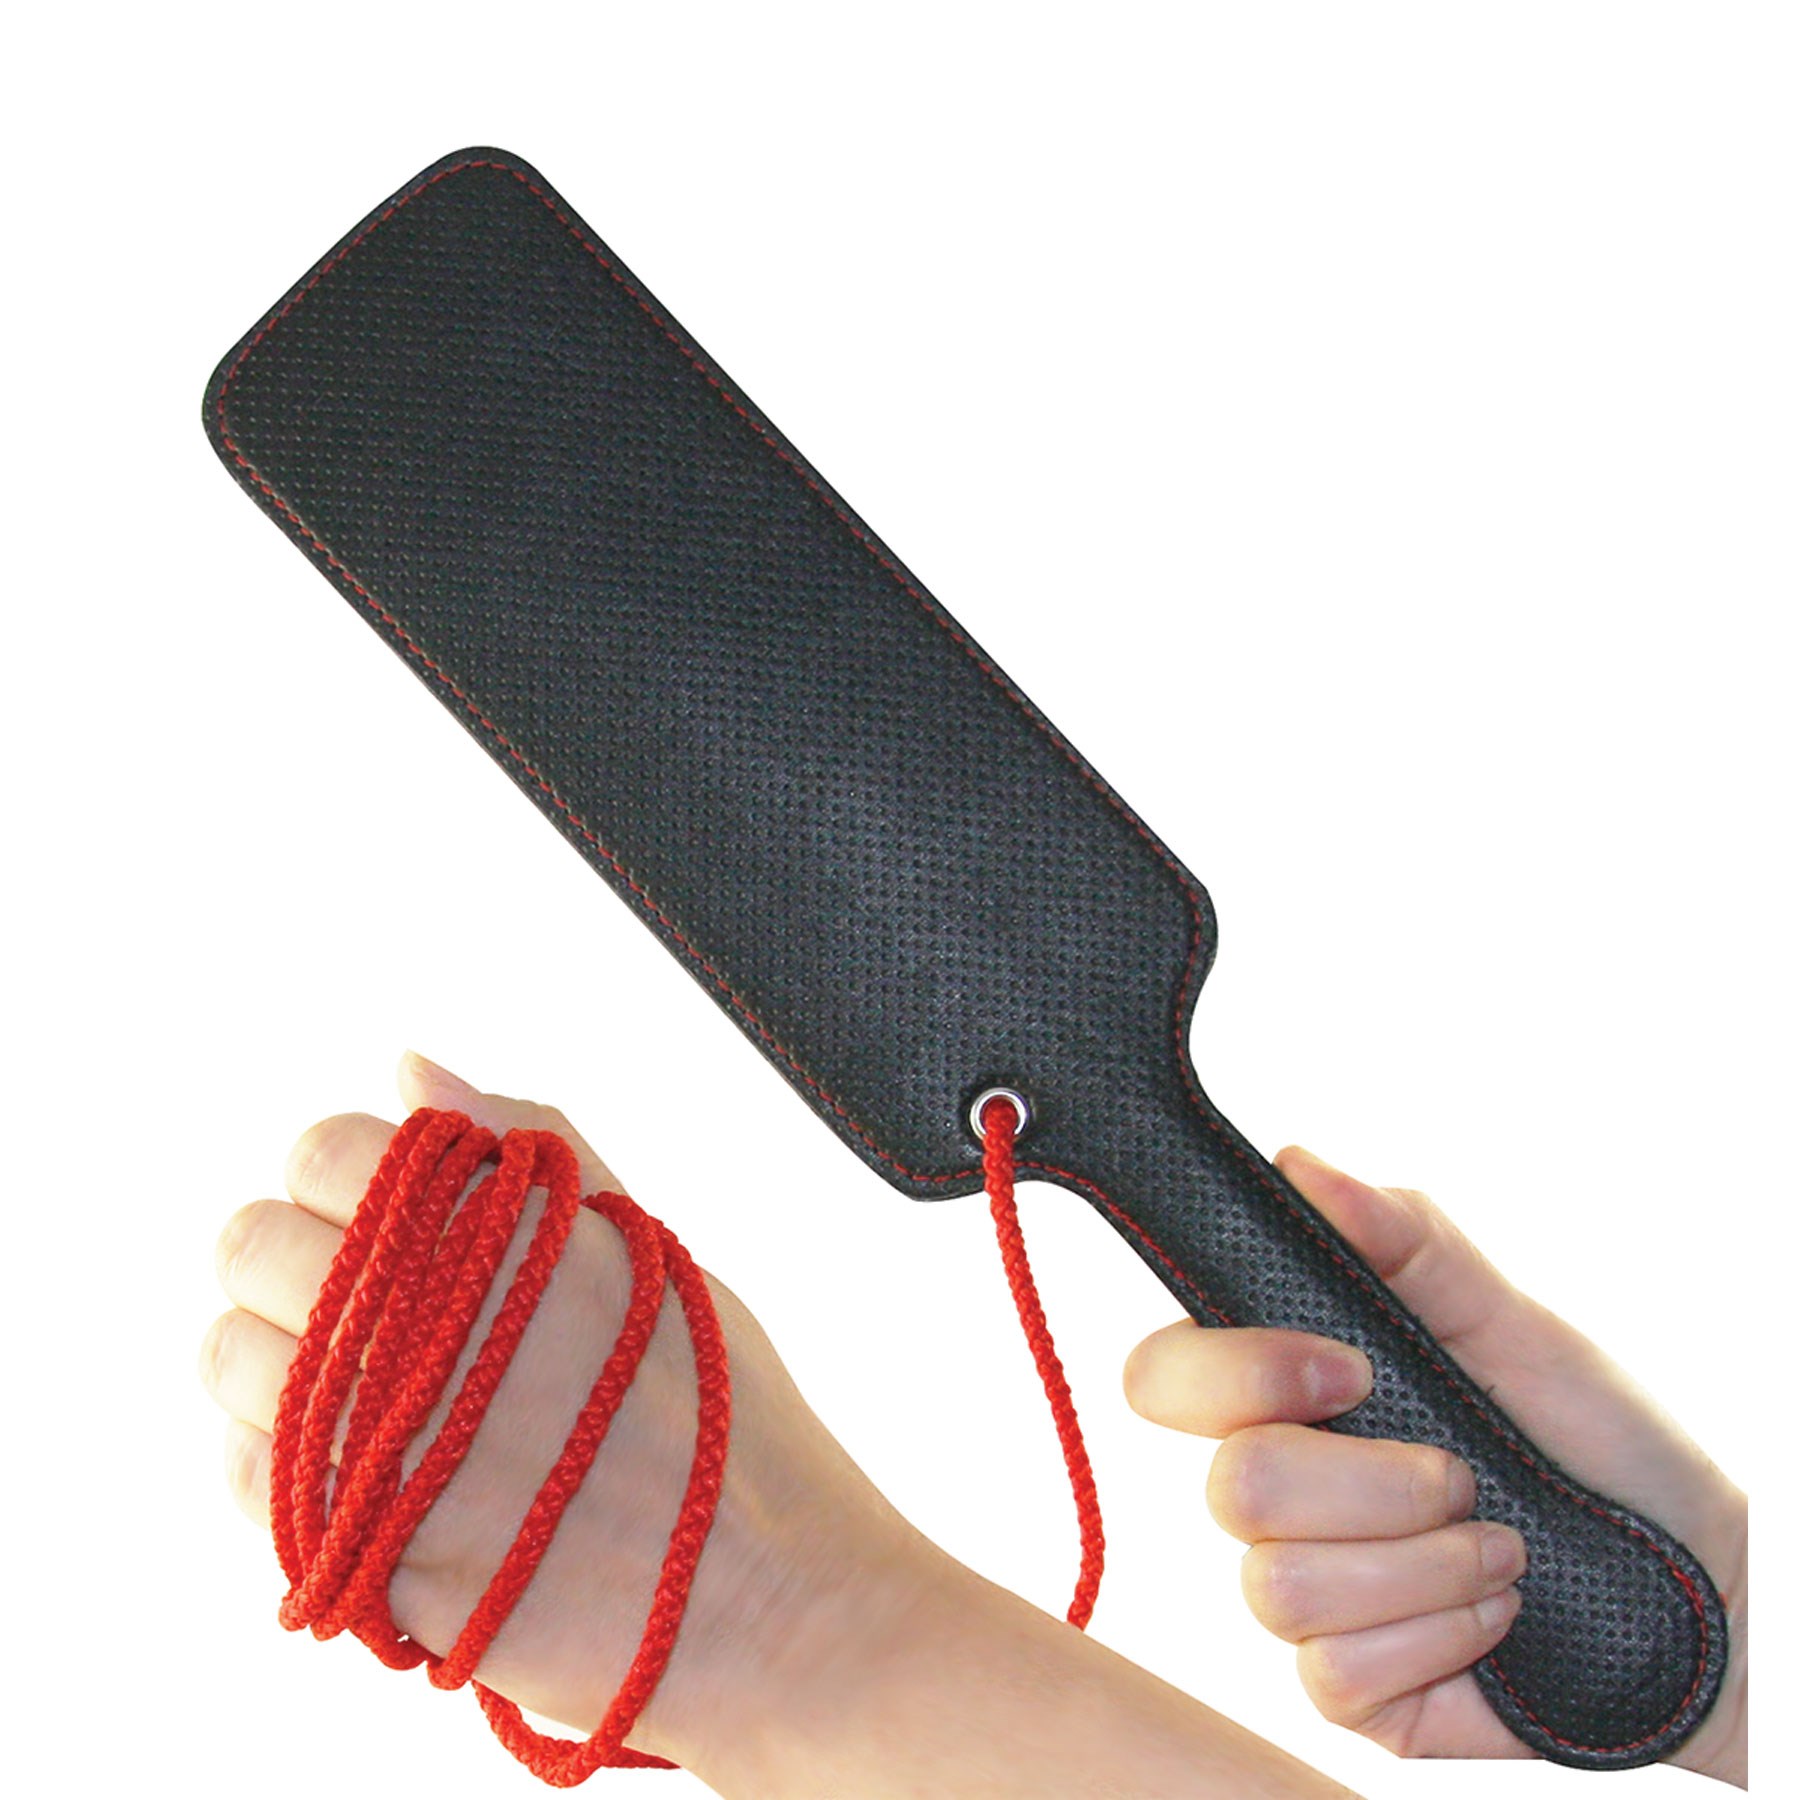 A&E's Scarlet Spank Me Paddle shown with binding rope wrapped around hand